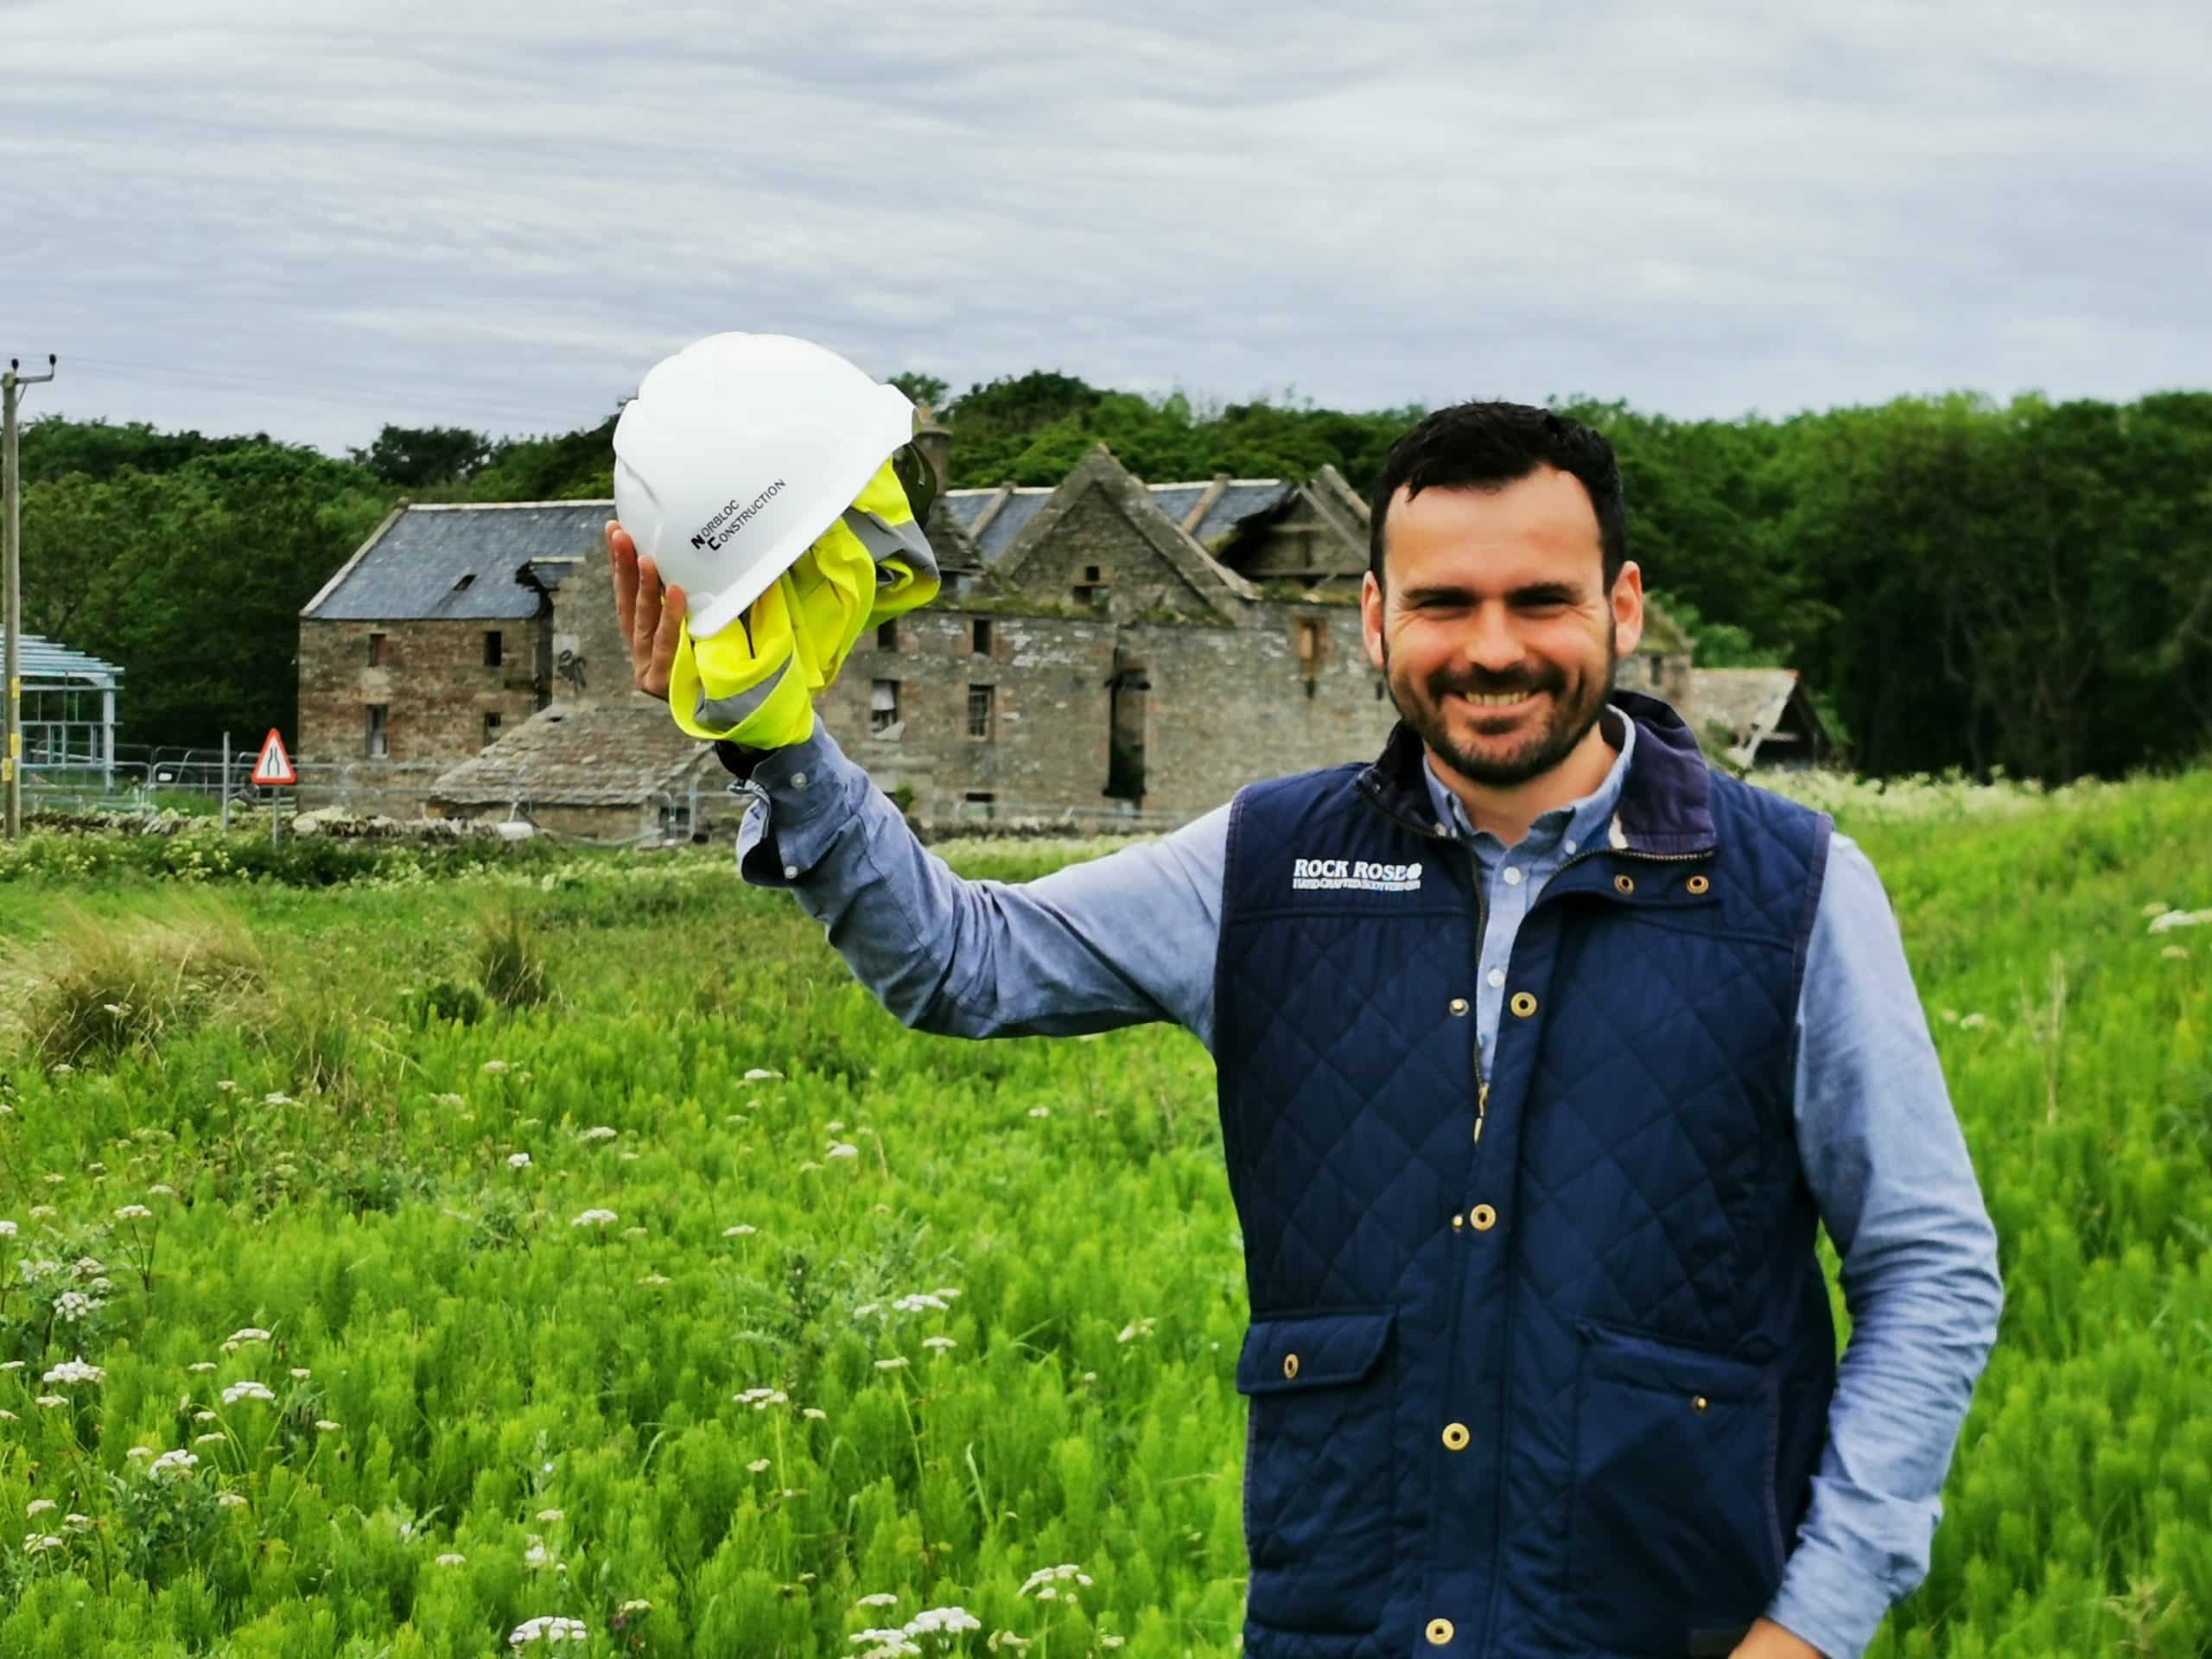 Martin holding a hard hat in front of the Castletown Mill building